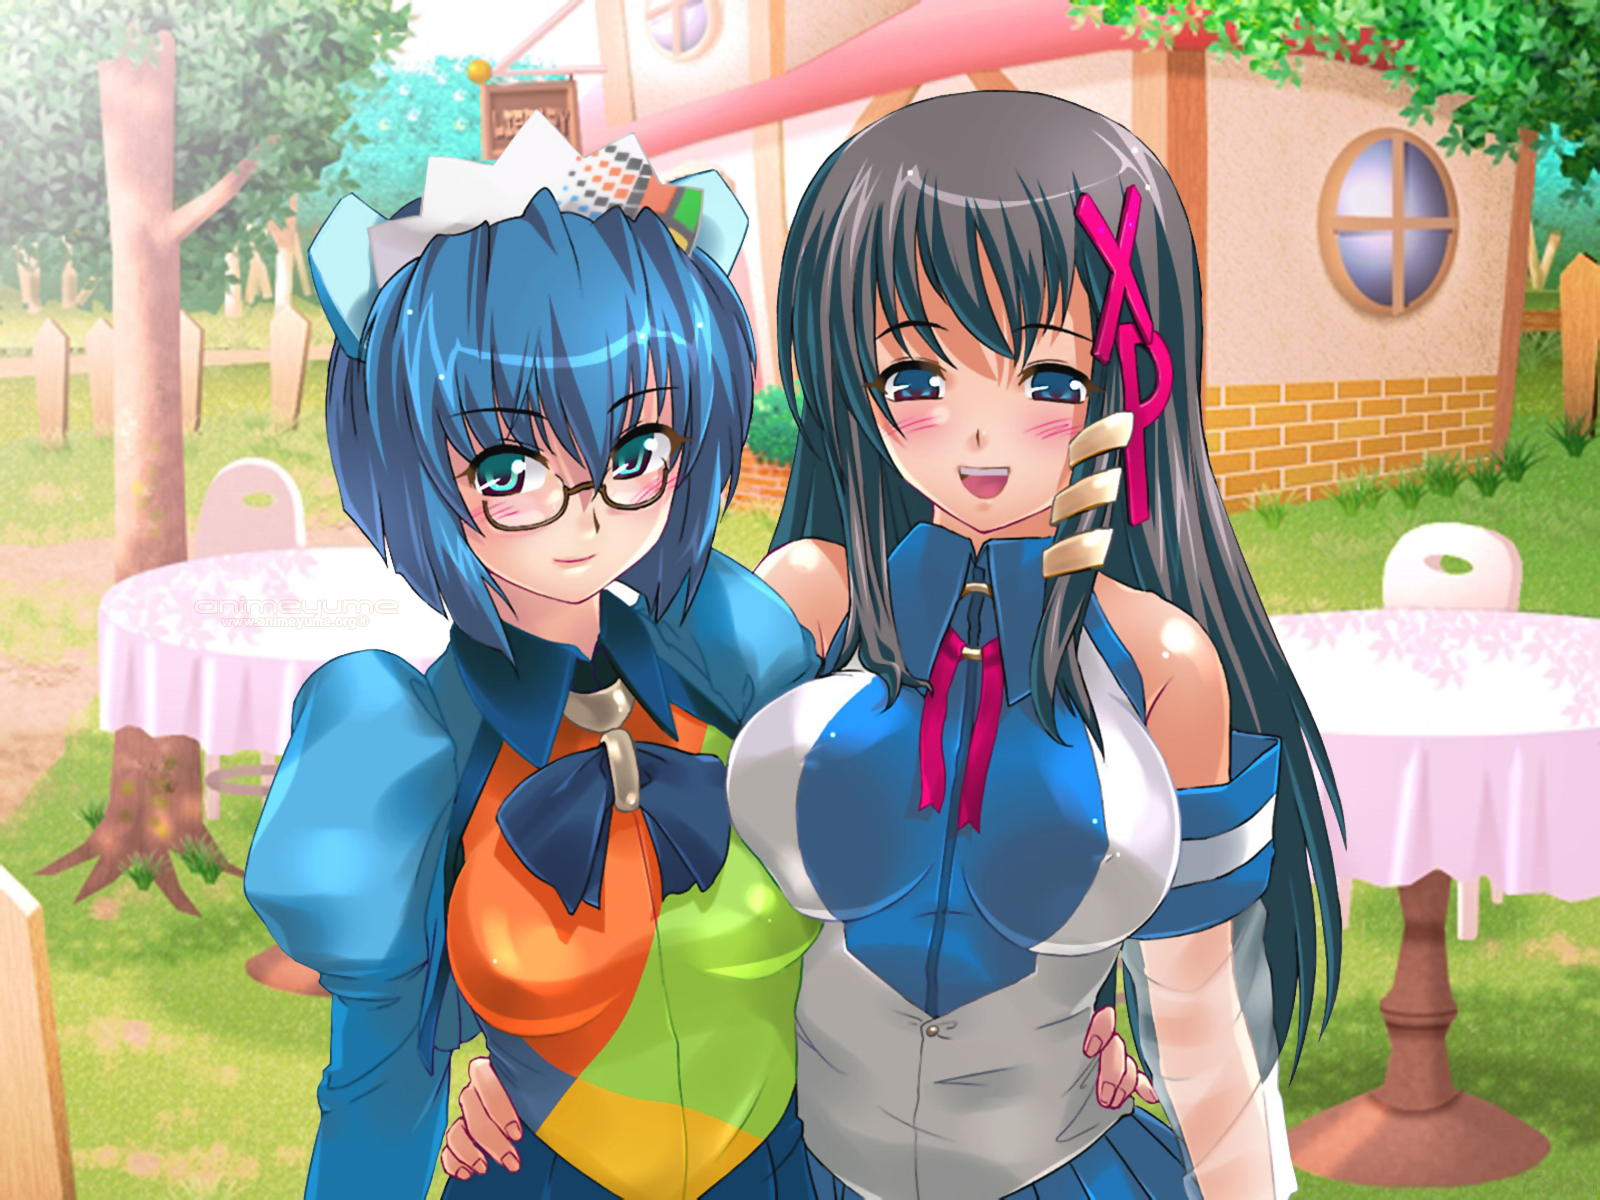 An animated depiction of Microsoft operating system characters, including Windows XP-tan, Windows Vista-tan, and an anime-style Windows girl.